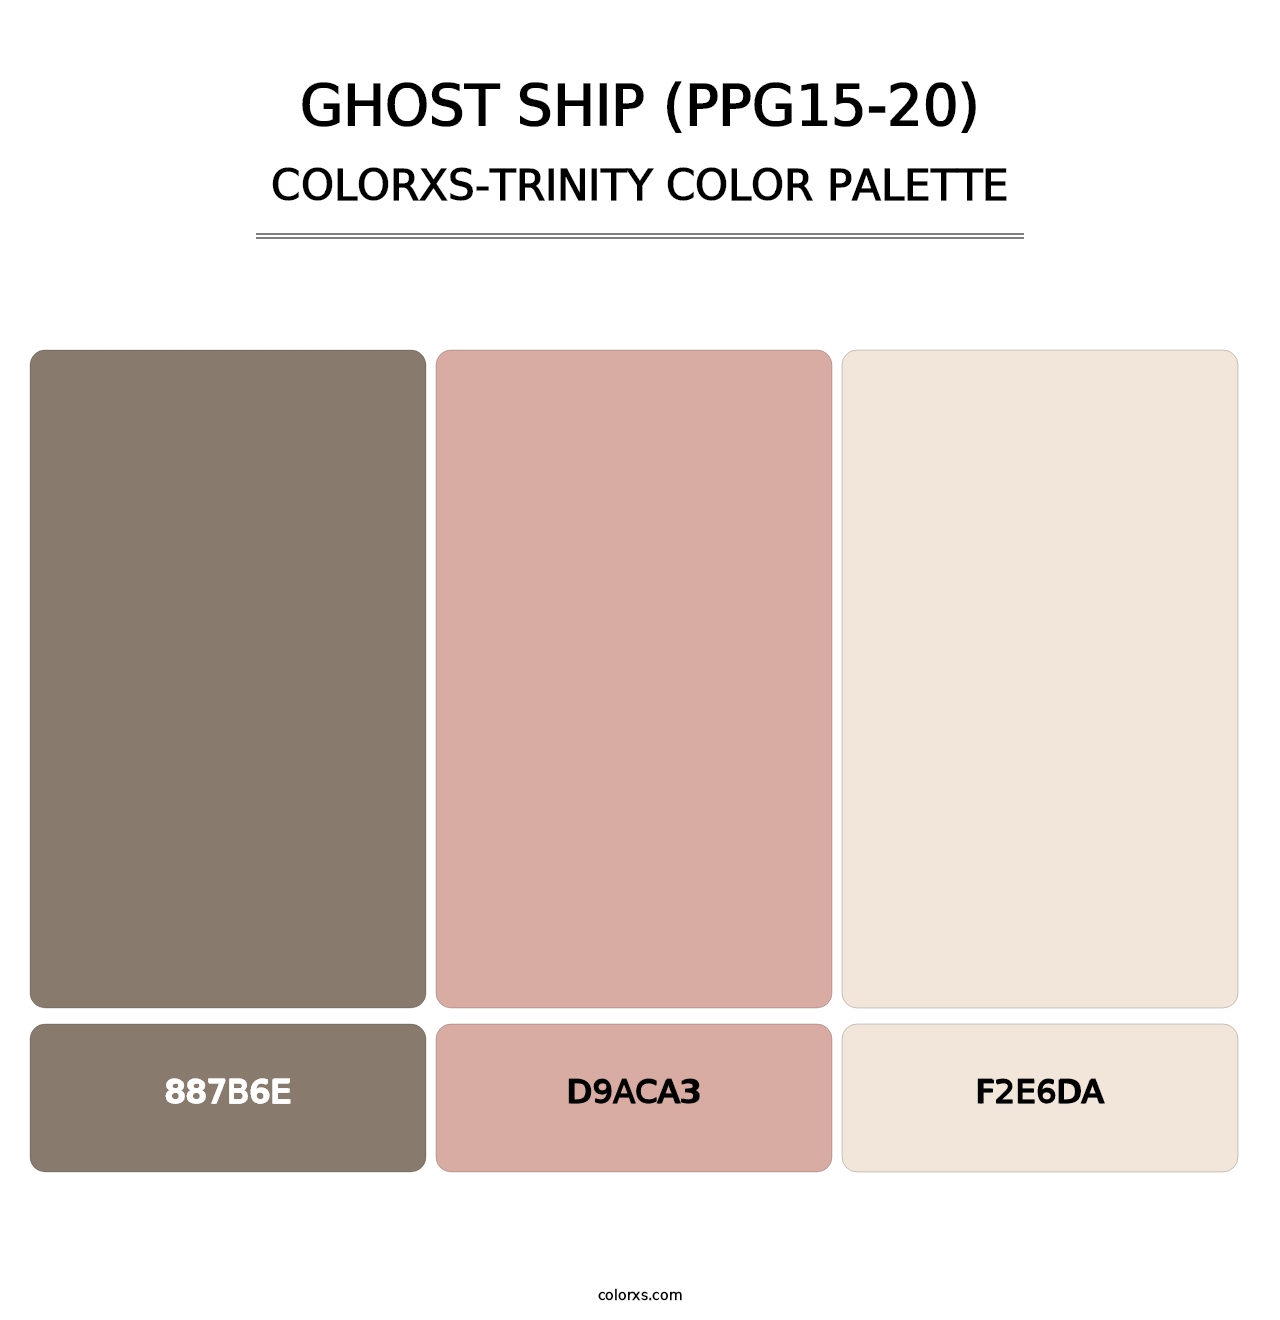 Ghost Ship (PPG15-20) - Colorxs Trinity Palette